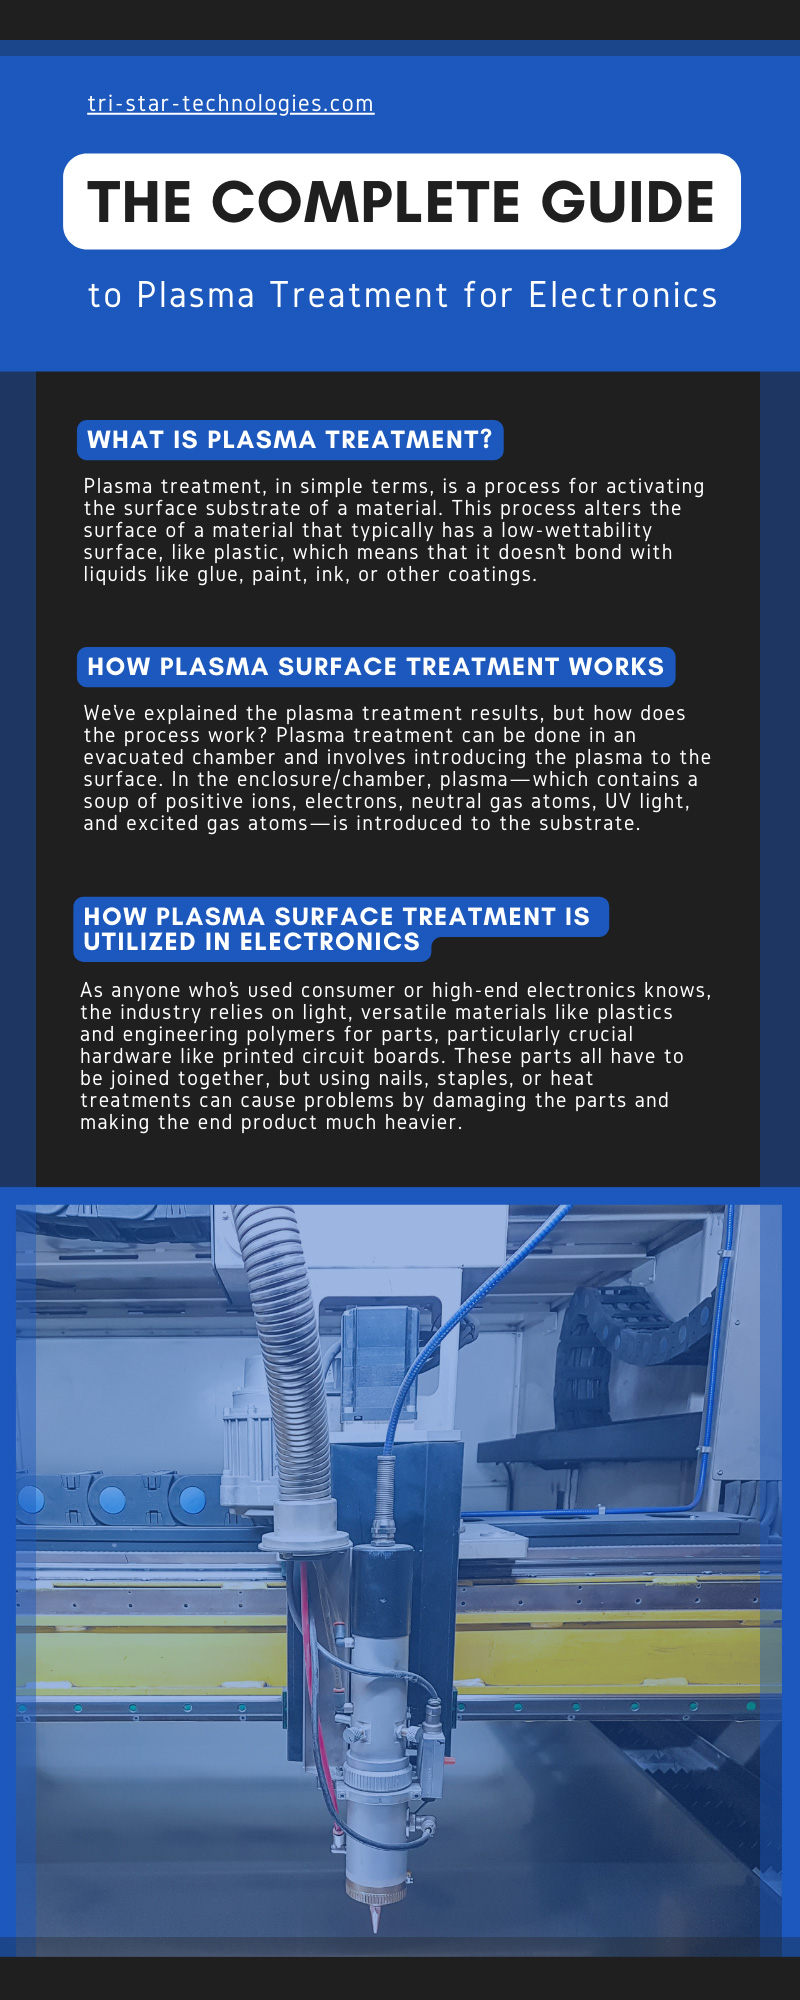 The Complete Guide to Plasma Treatment for Electronics